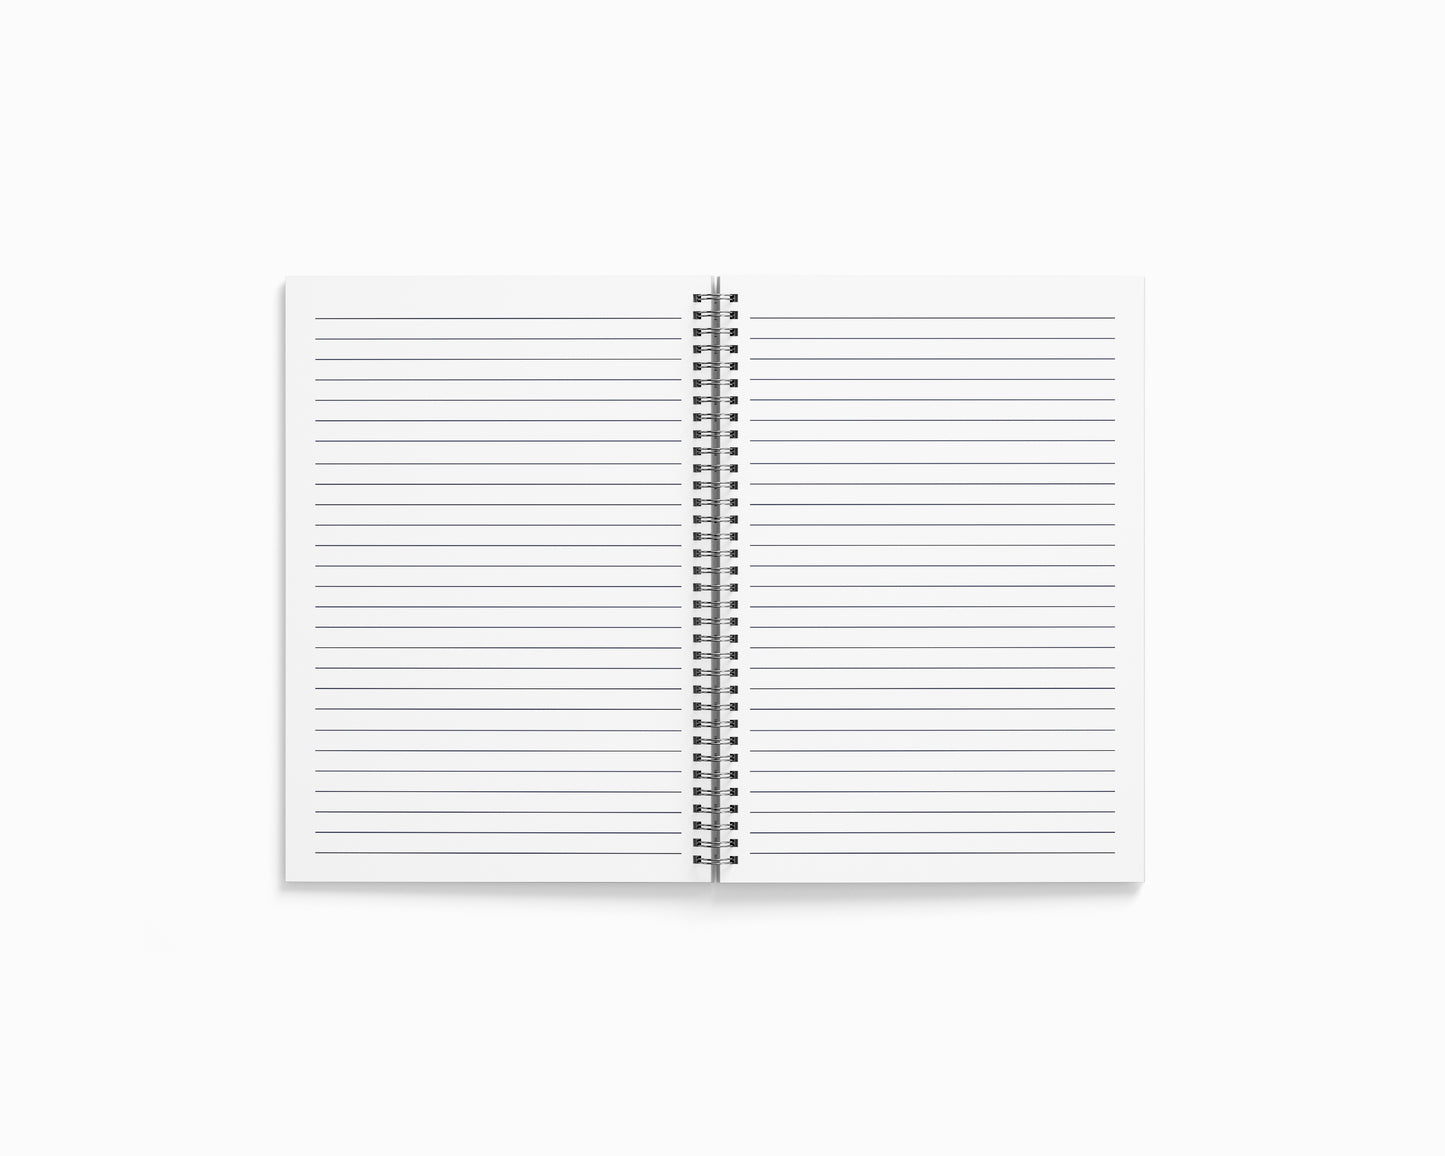 Chiloda Notebook (A5 Size, 100 Pages, Ruled)